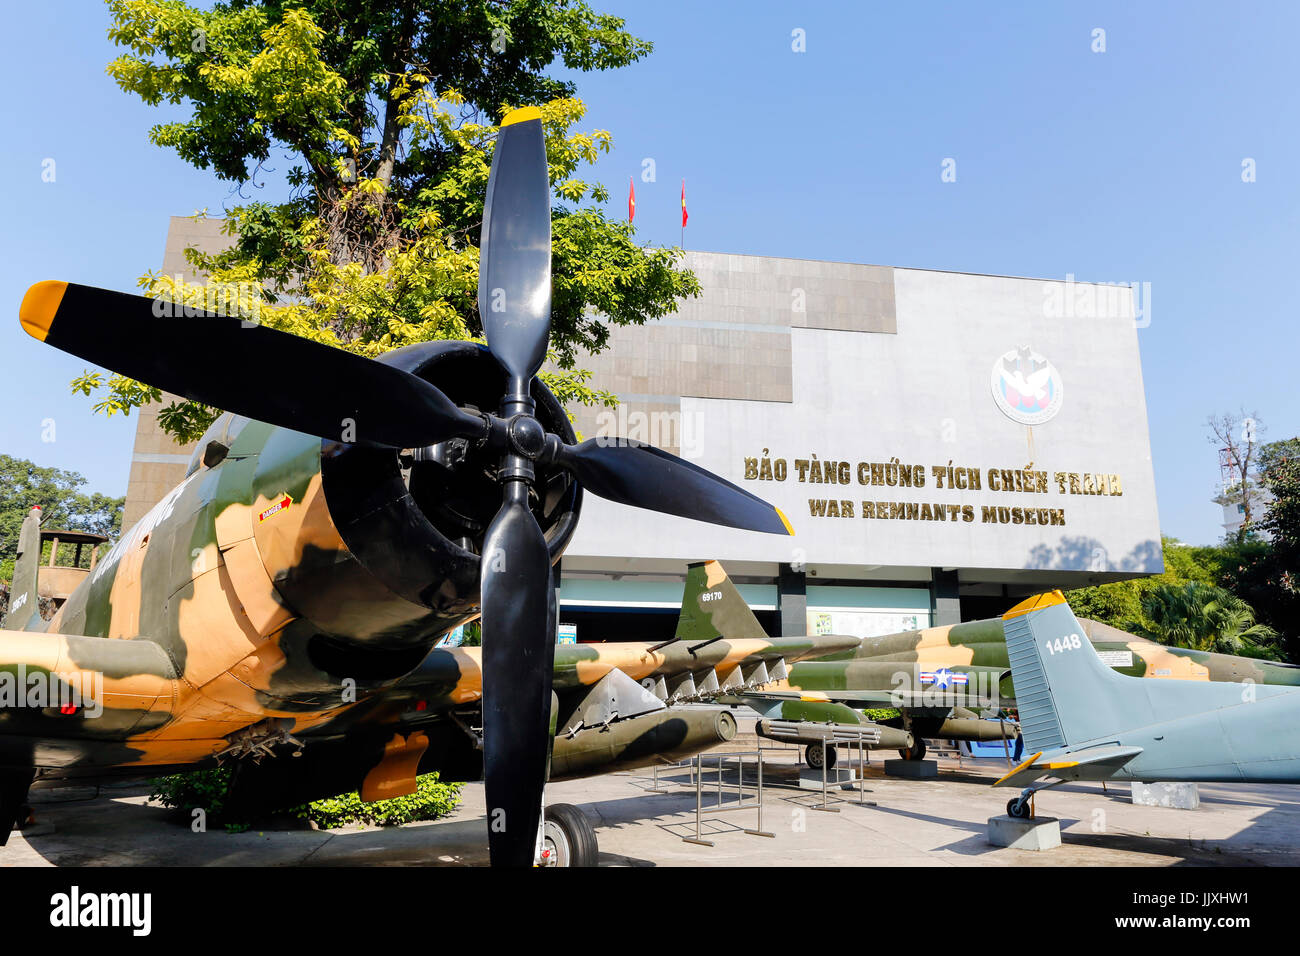 Ho Chi Minh City, Vietnam - January 19, 2016: The War Remnants Museum is a war museum in District 3, Ho Chi Minh City, Vietnam. Stock Photo